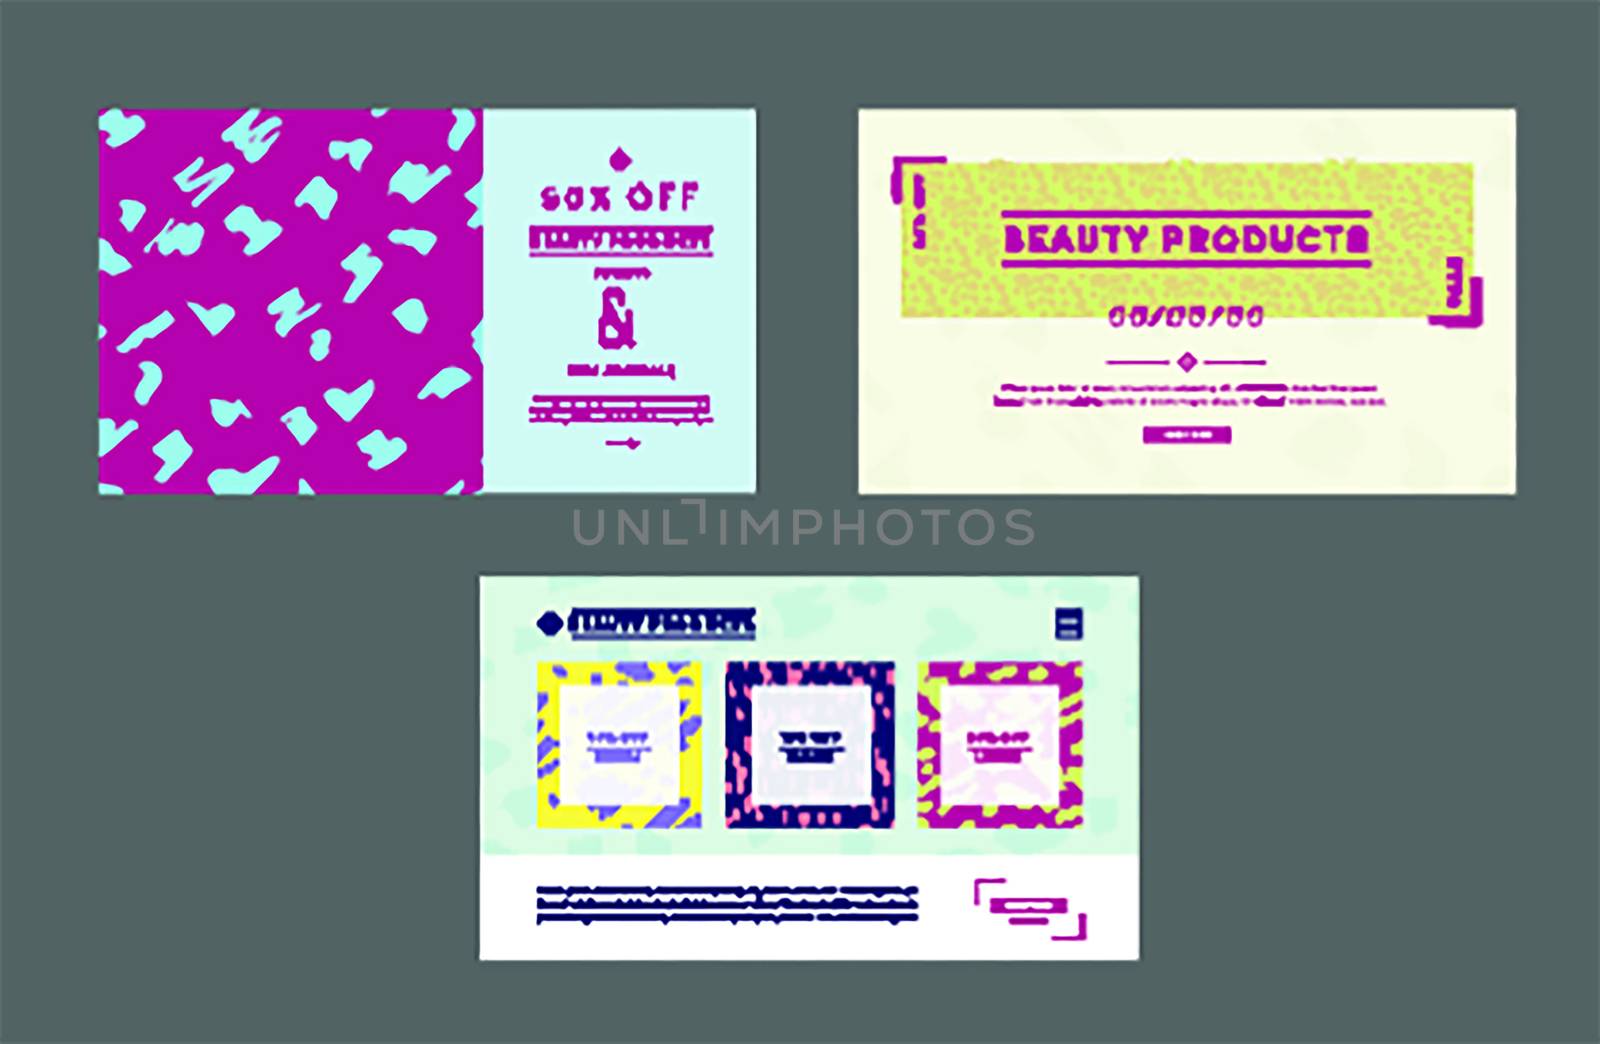 Vector set of greetiing card with beauty products text against white background